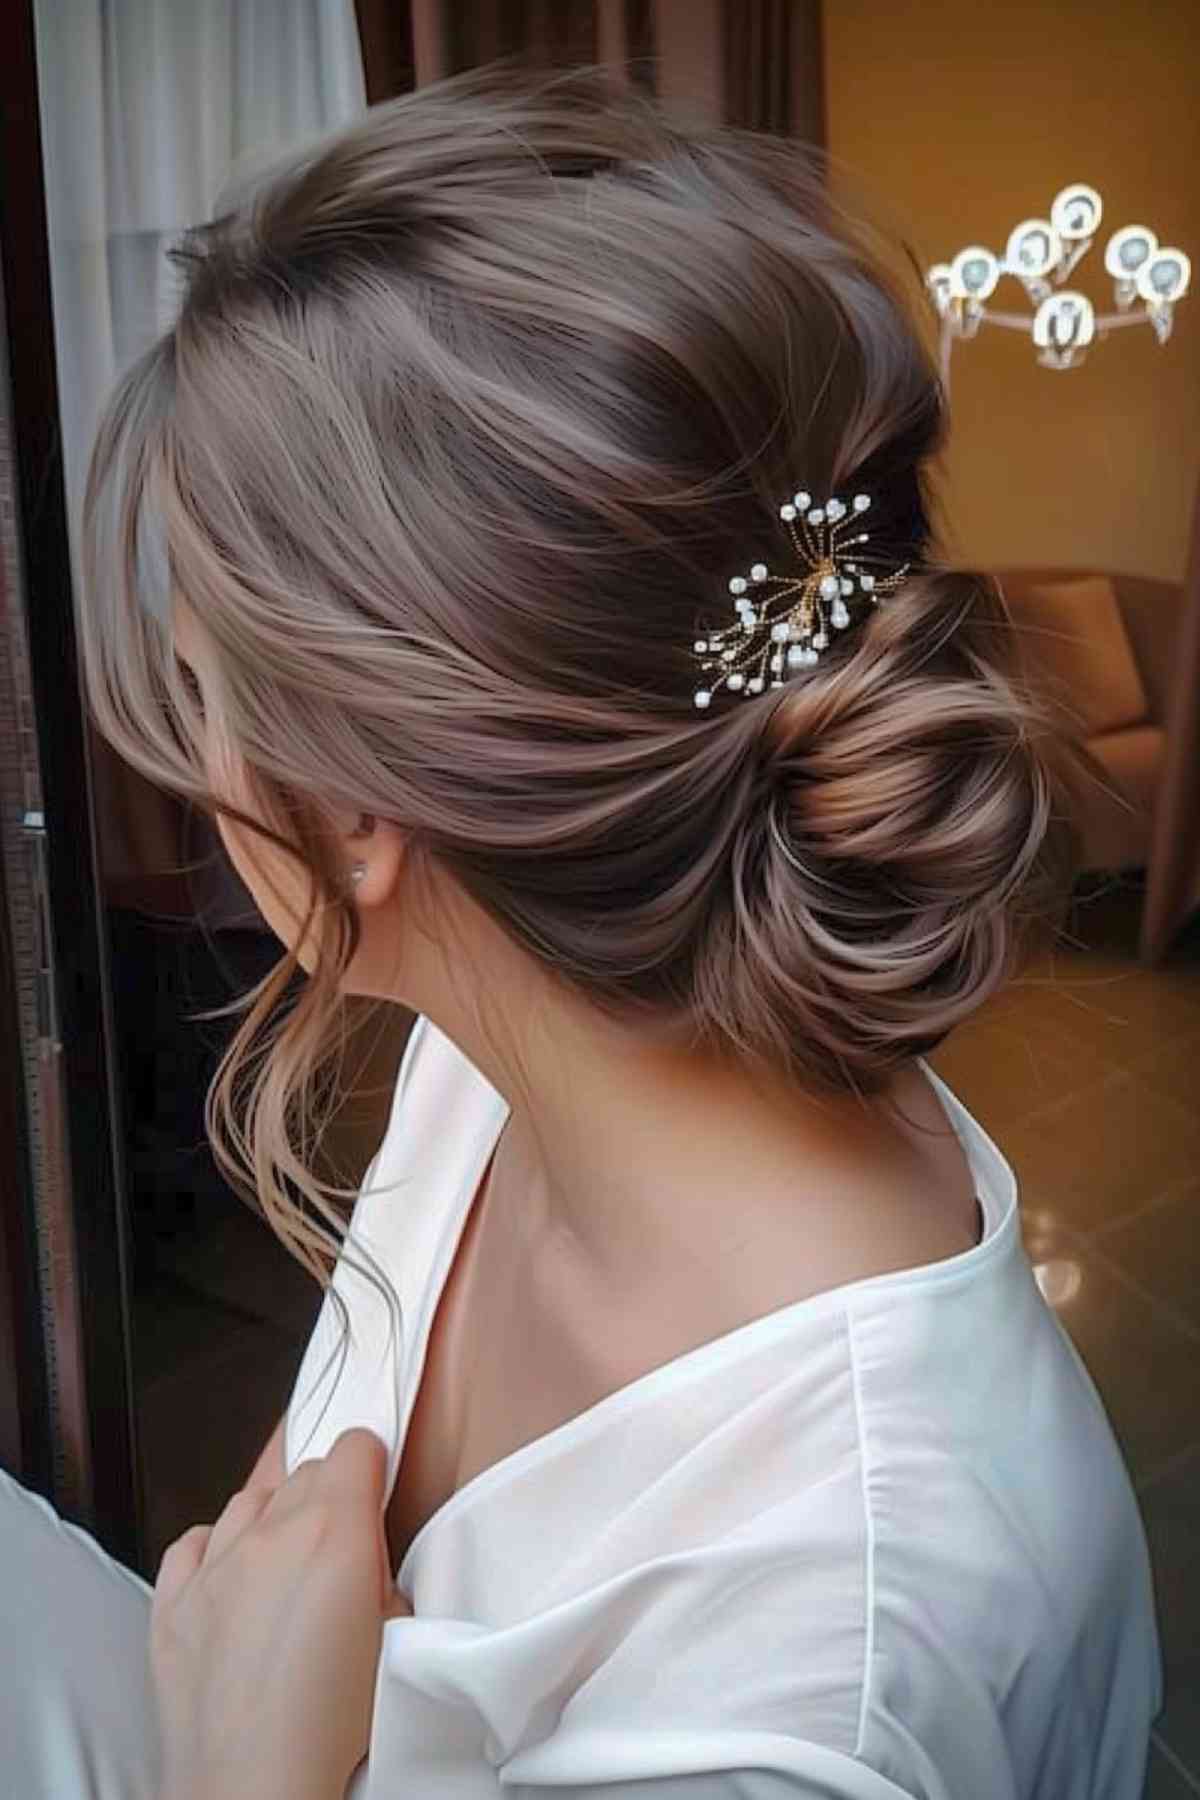 Elegant low bun updo with sparkling hair accessory for brides